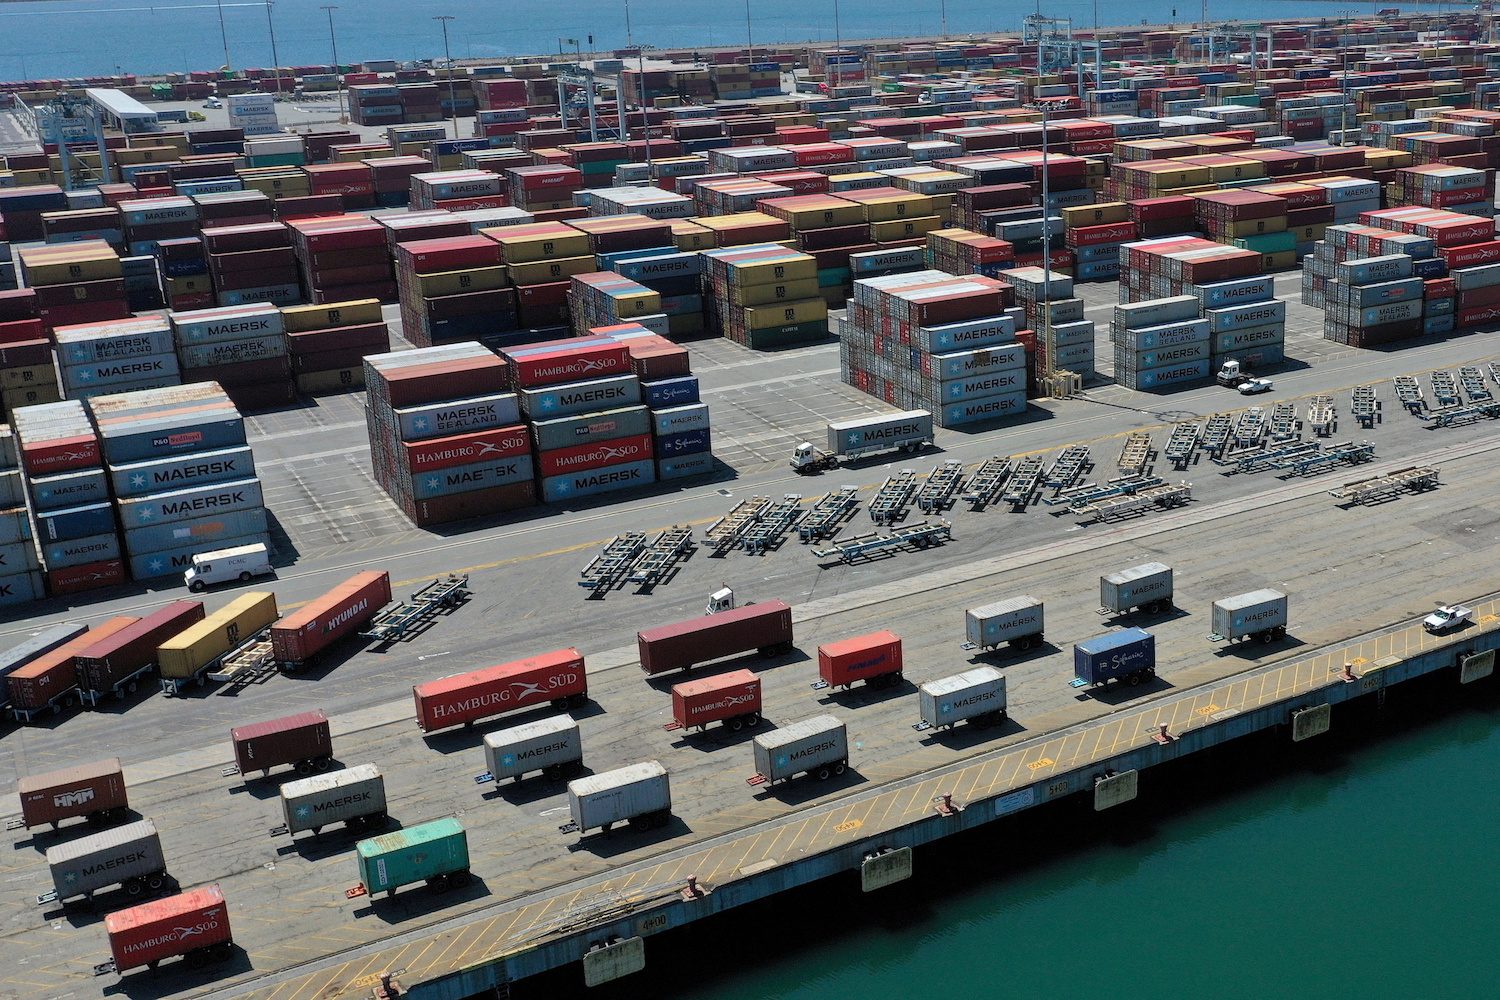 Qatar targets $10 billion of investments in US ports – sources